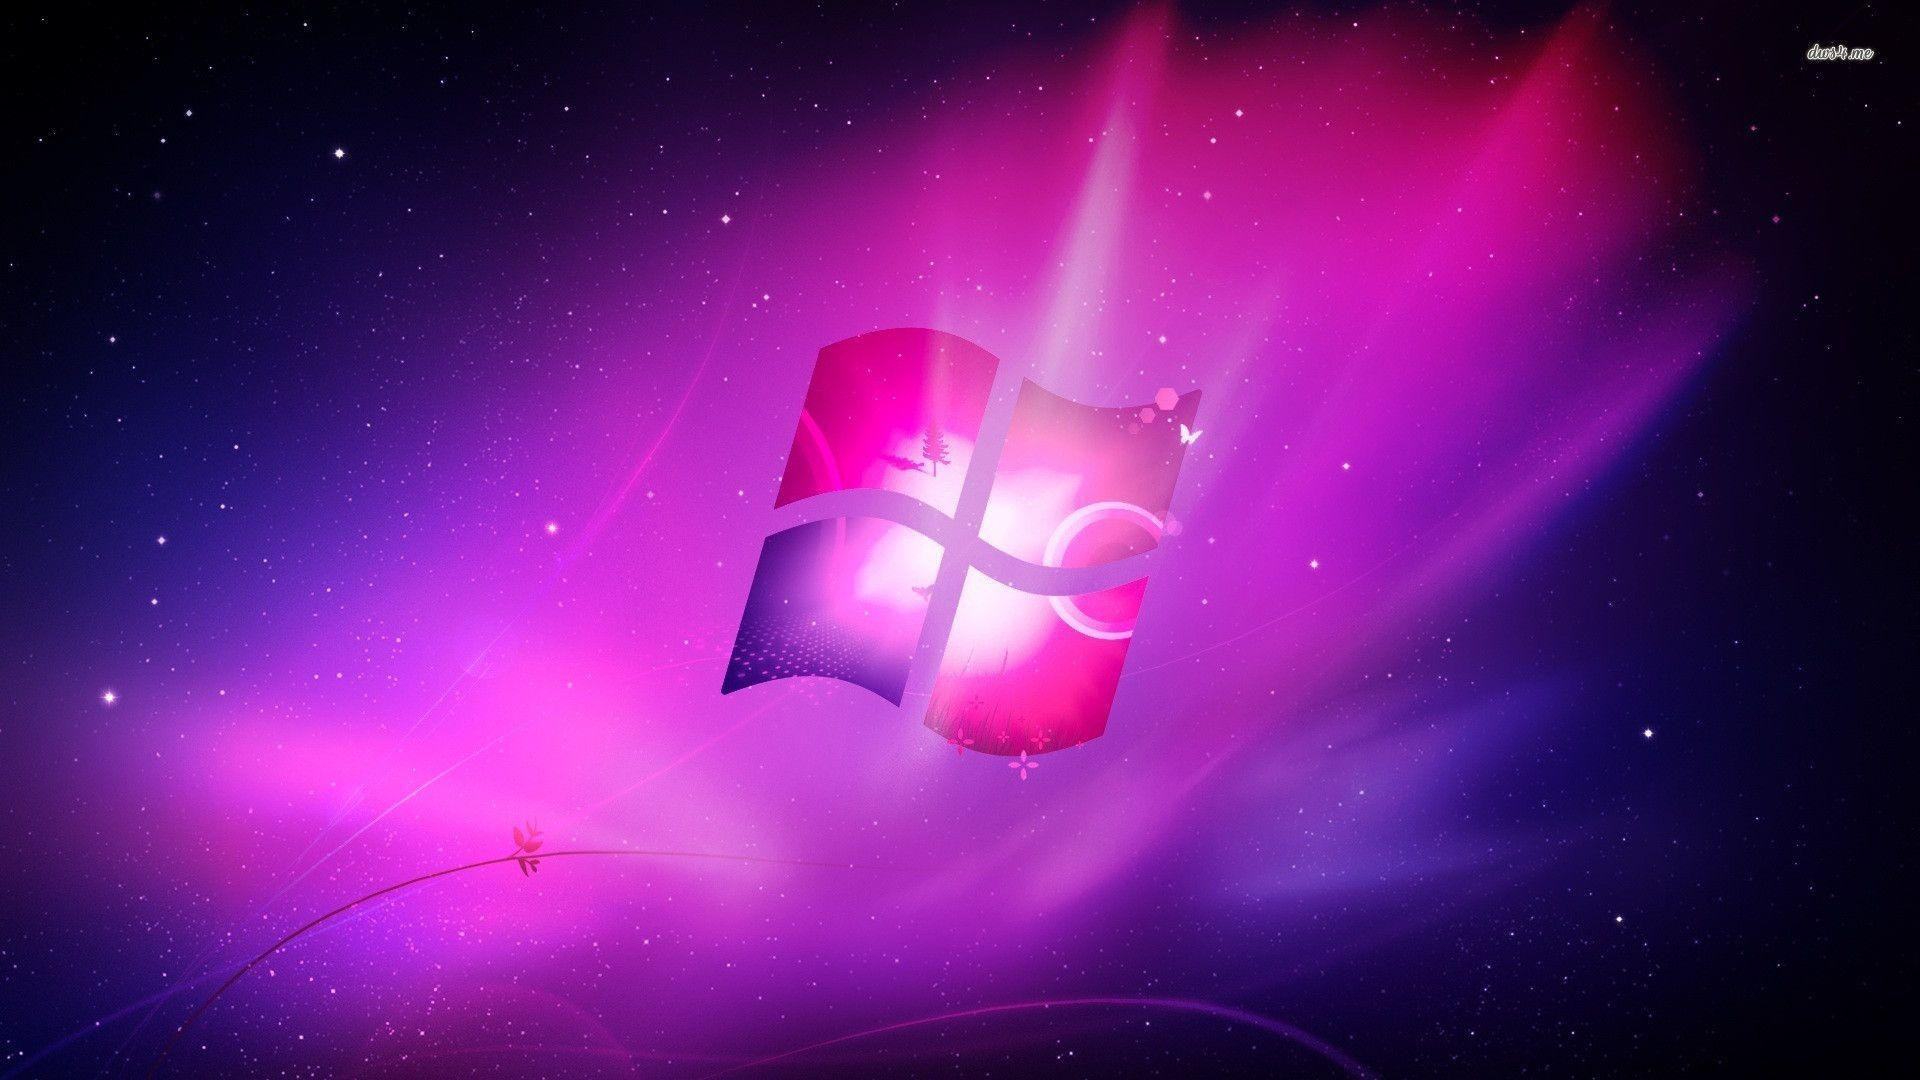 Purple Wallpapers For Computer - Wallpaper Cave